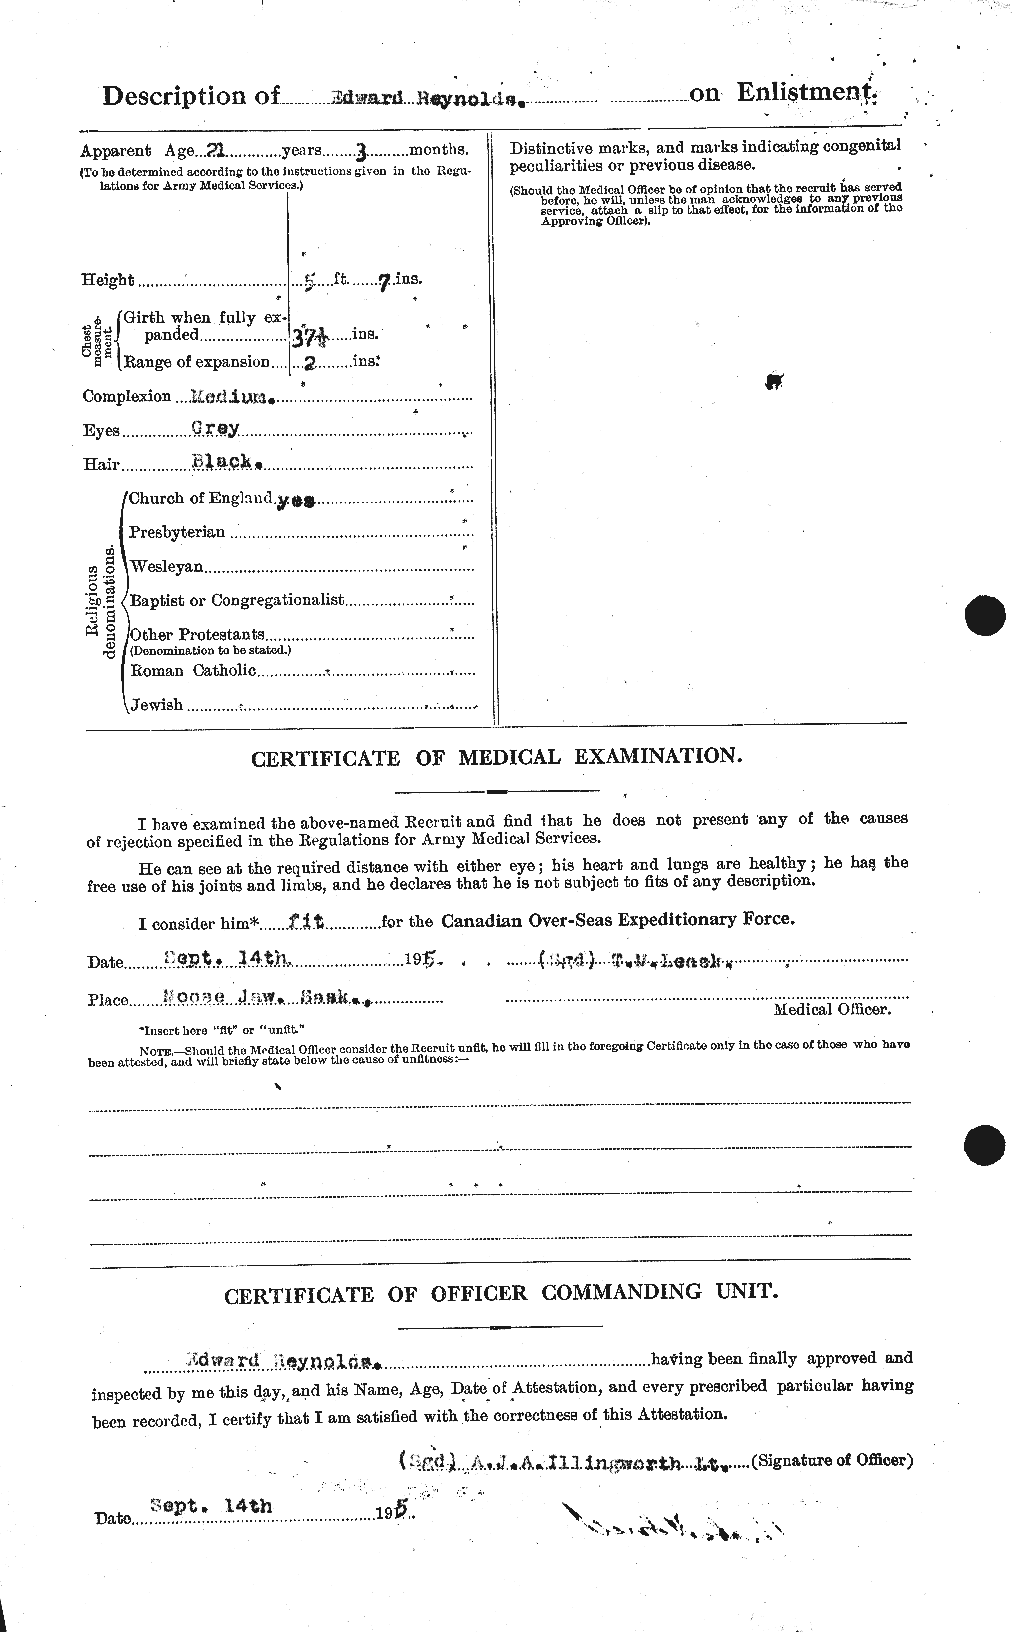 Personnel Records of the First World War - CEF 599147b